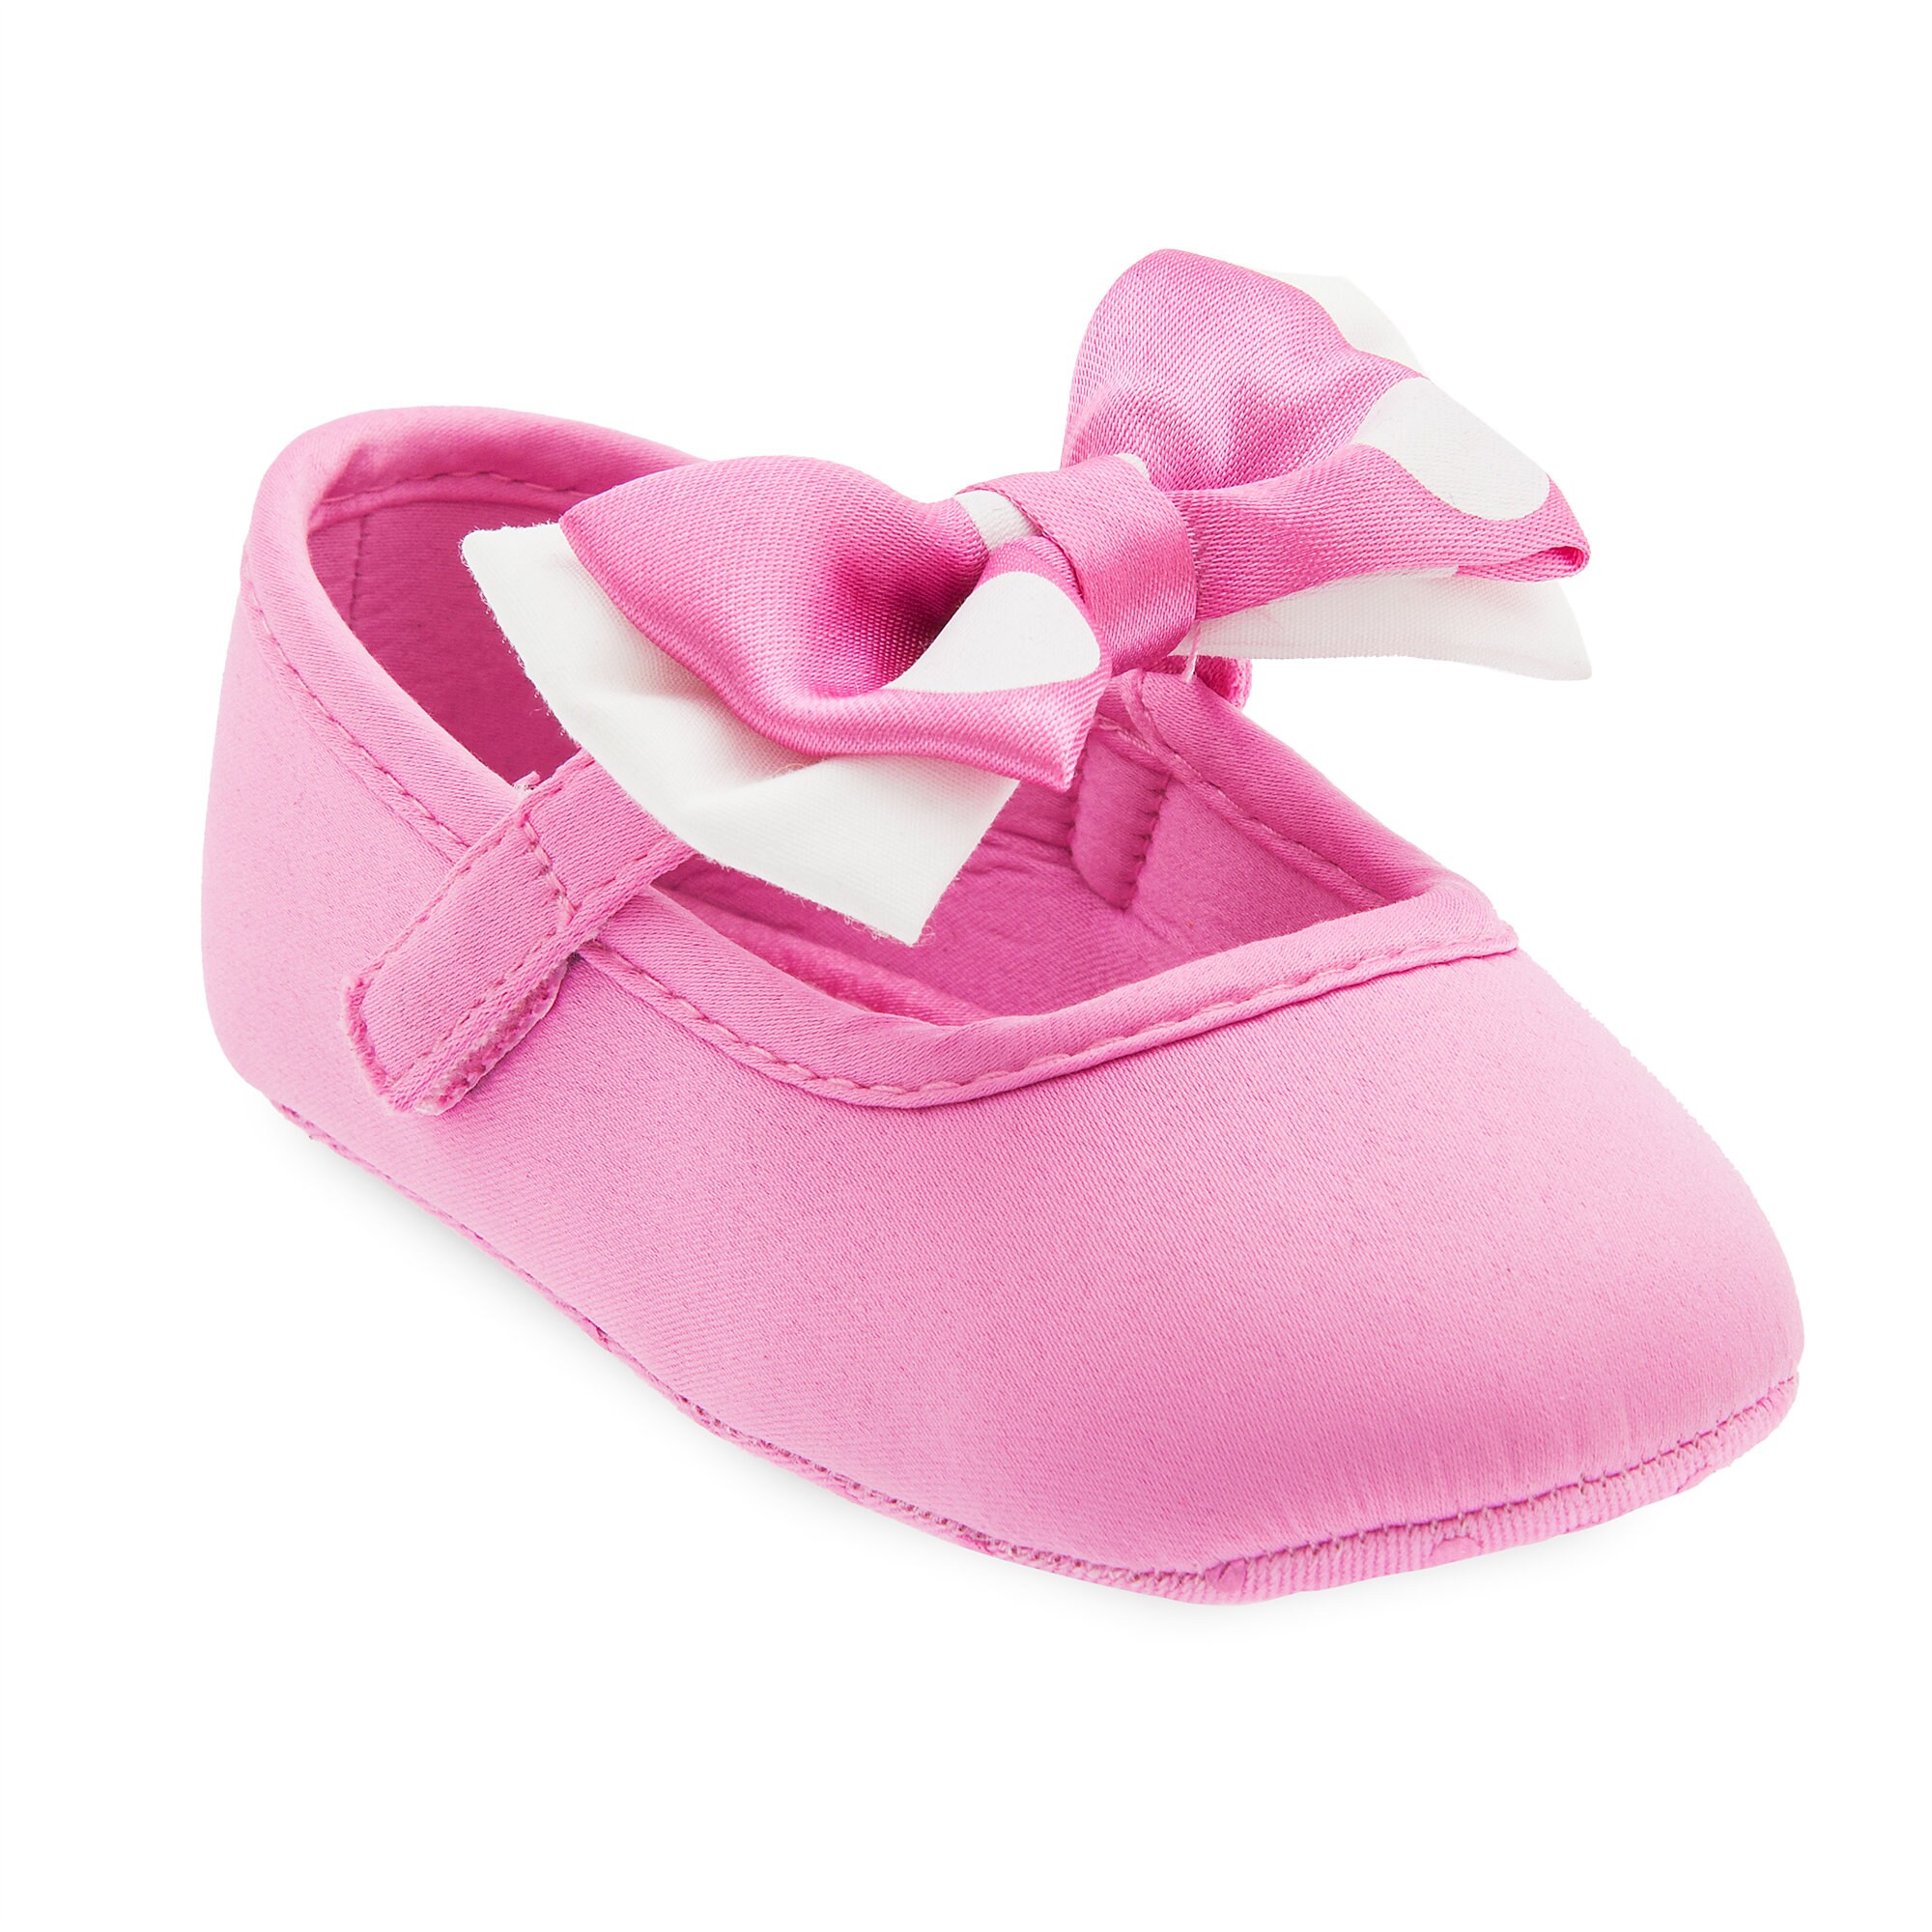 Minnie Mouse Costume Shoes for Baby - Pink